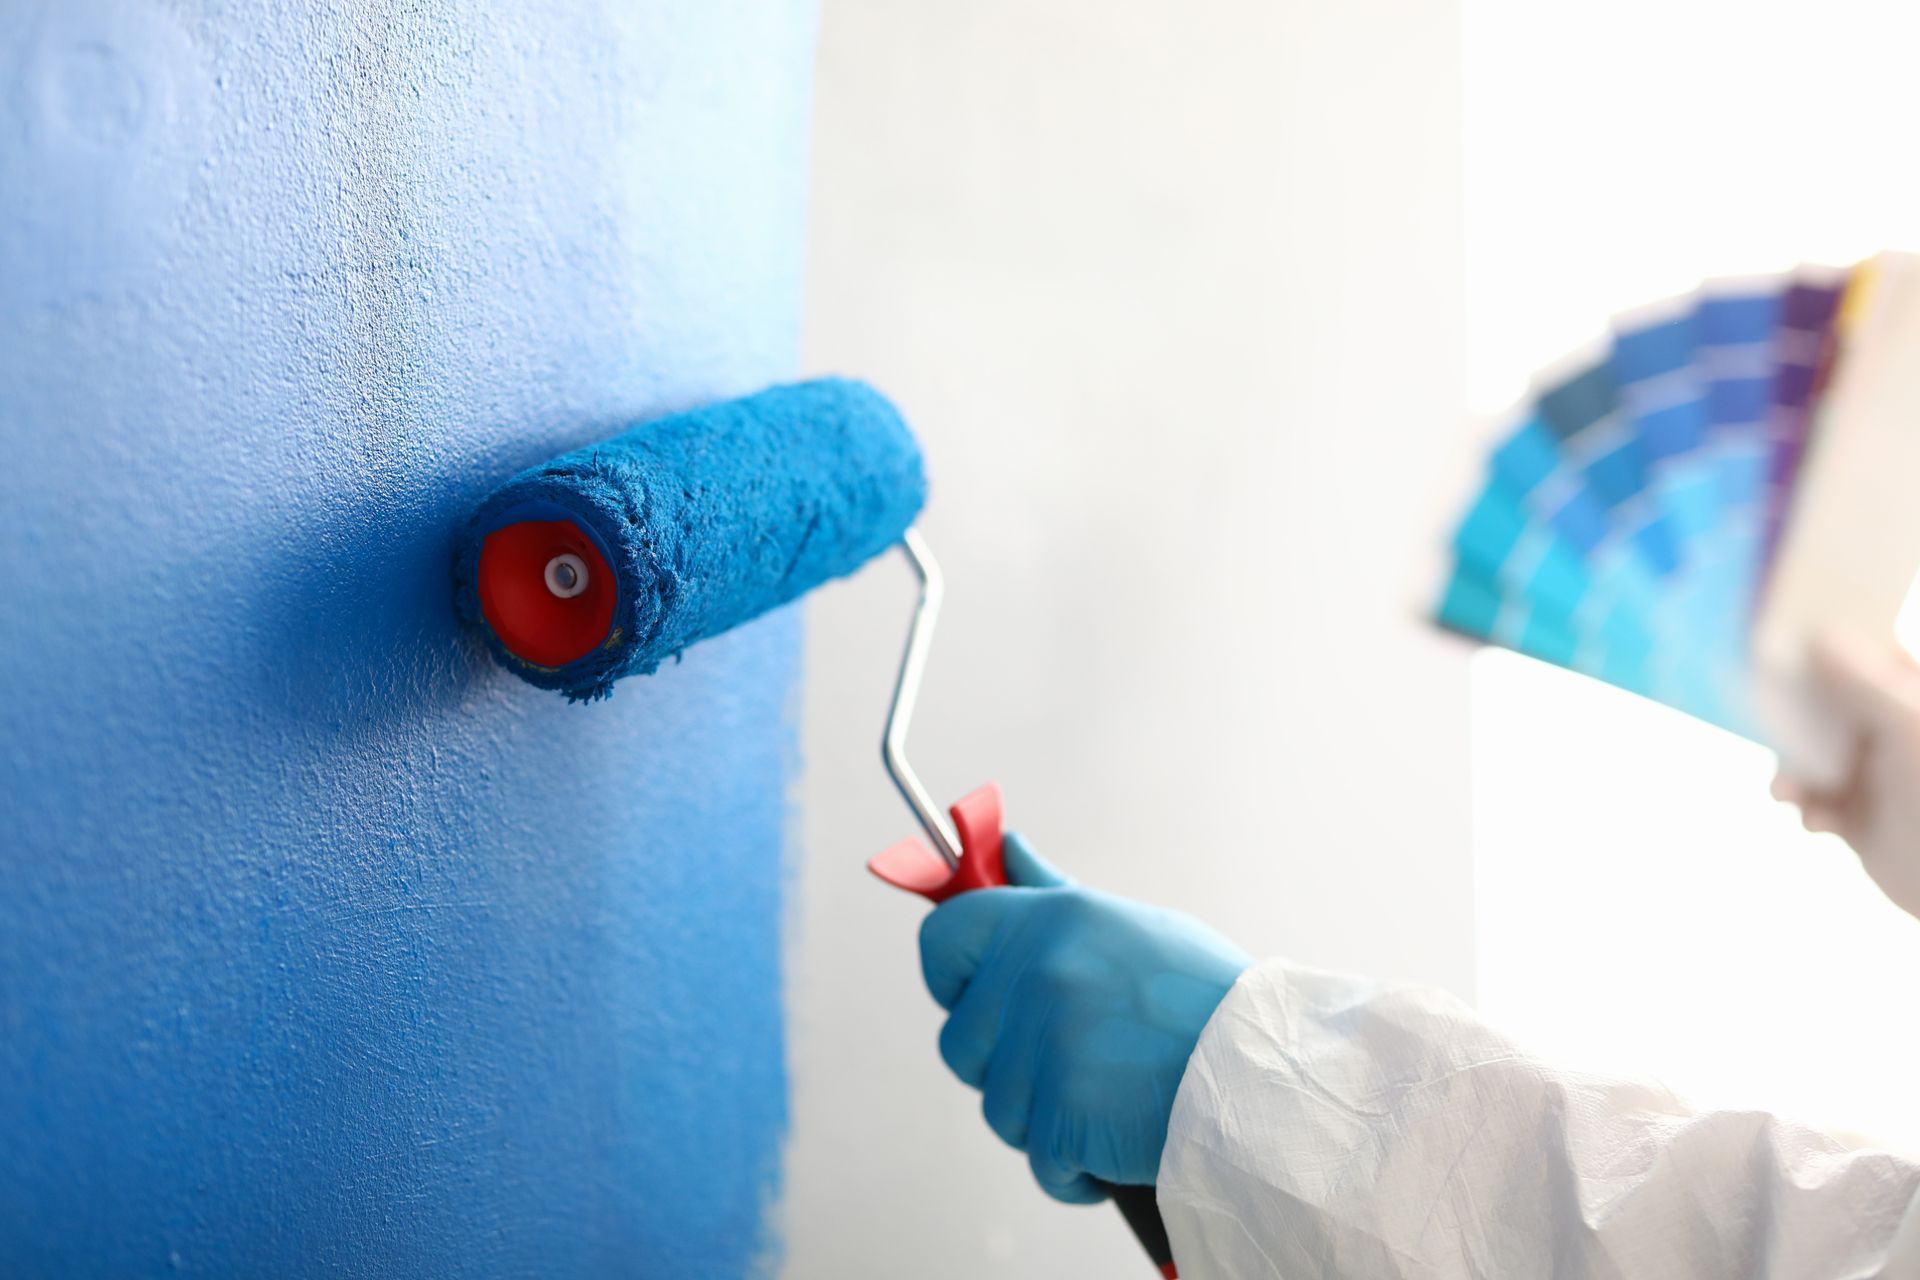 A person is painting a wall with a blue paint roller.